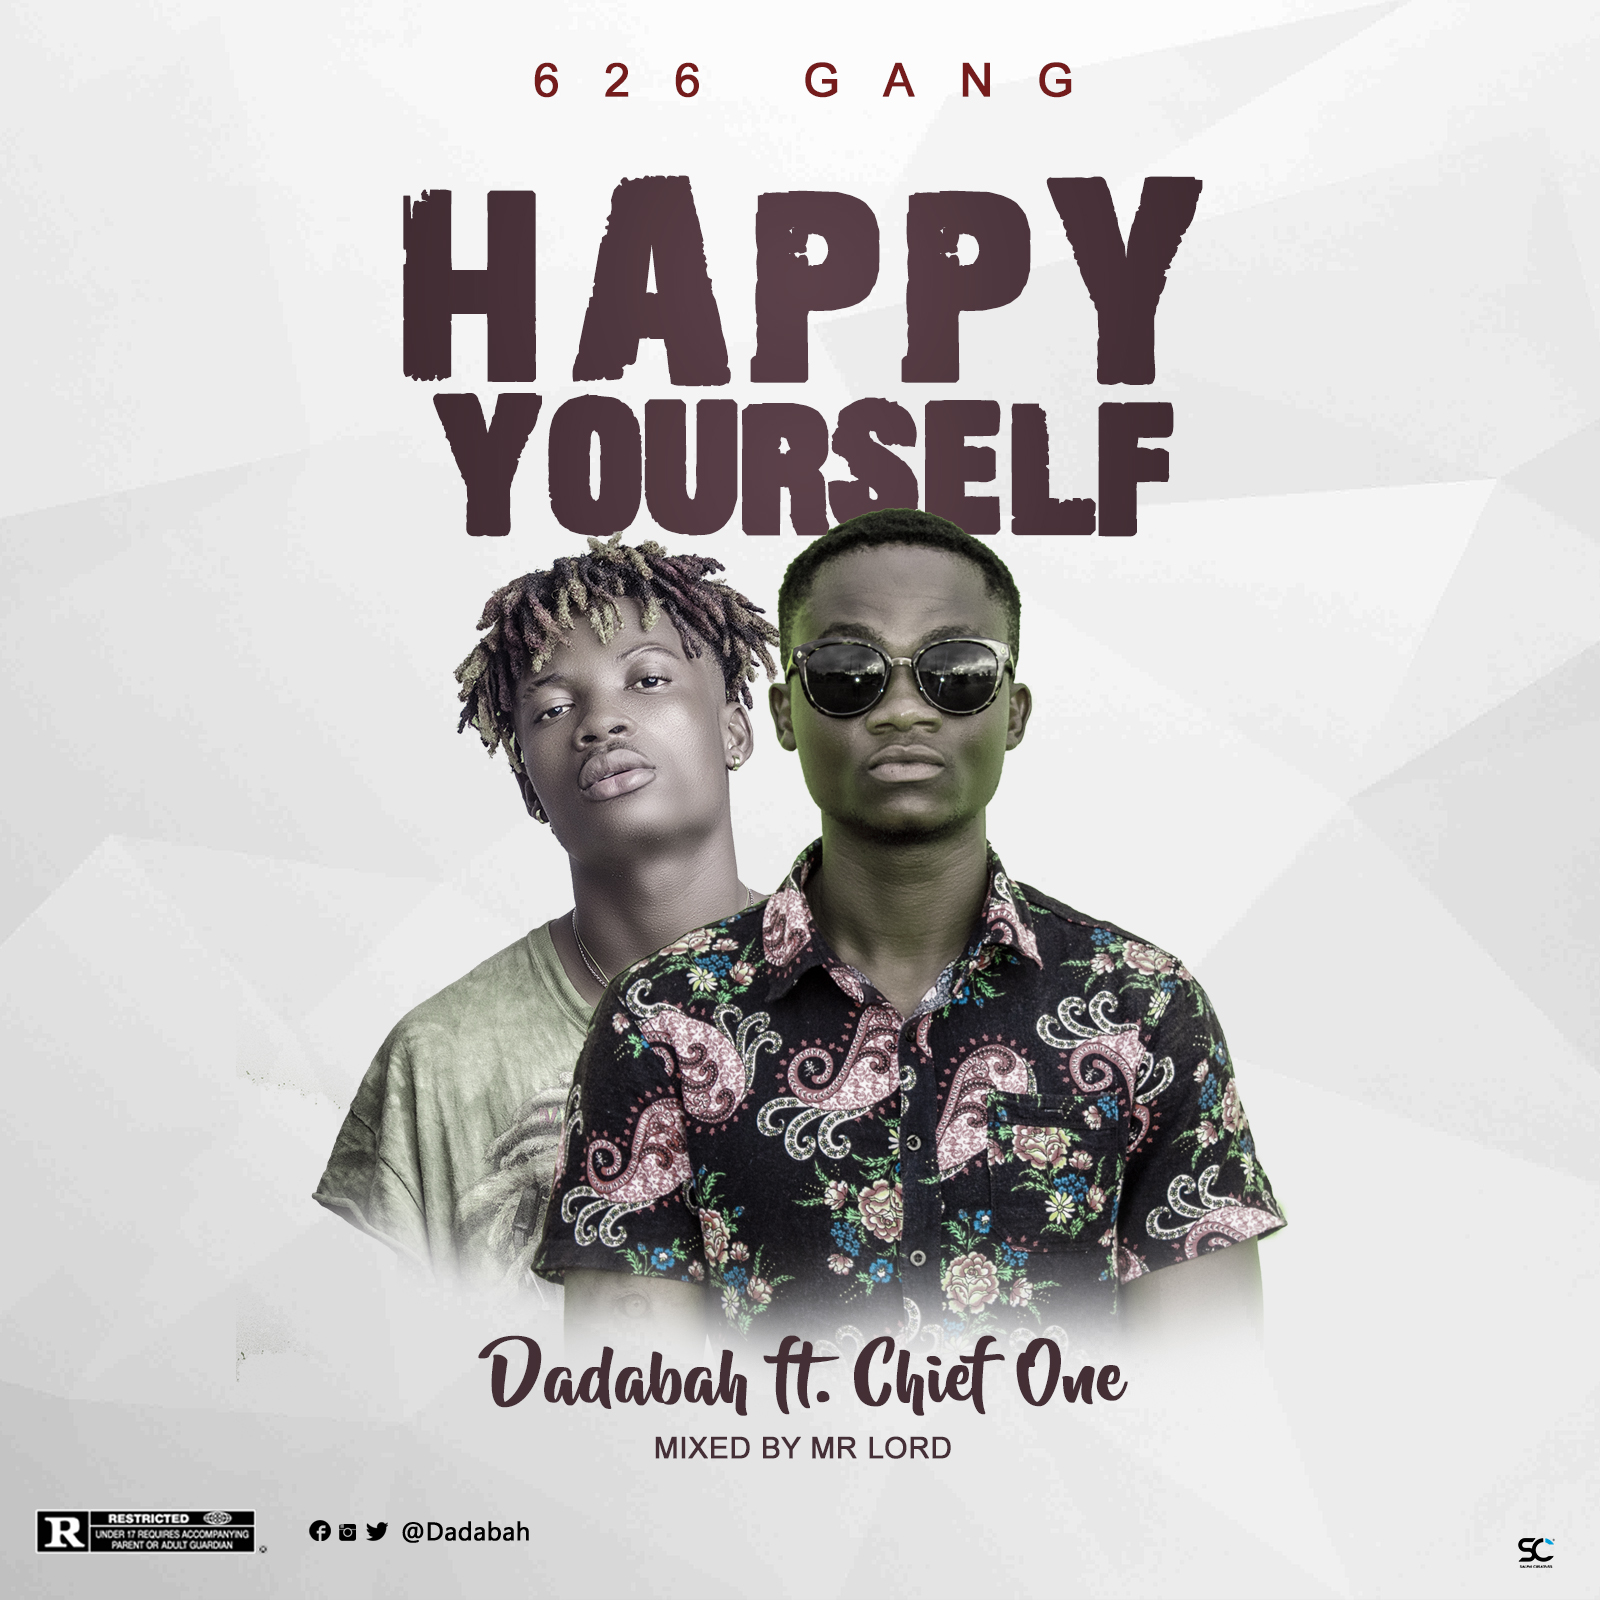 Dadabah Ft Chief One - Happy Yourself (Mixed By Mr. Lord)